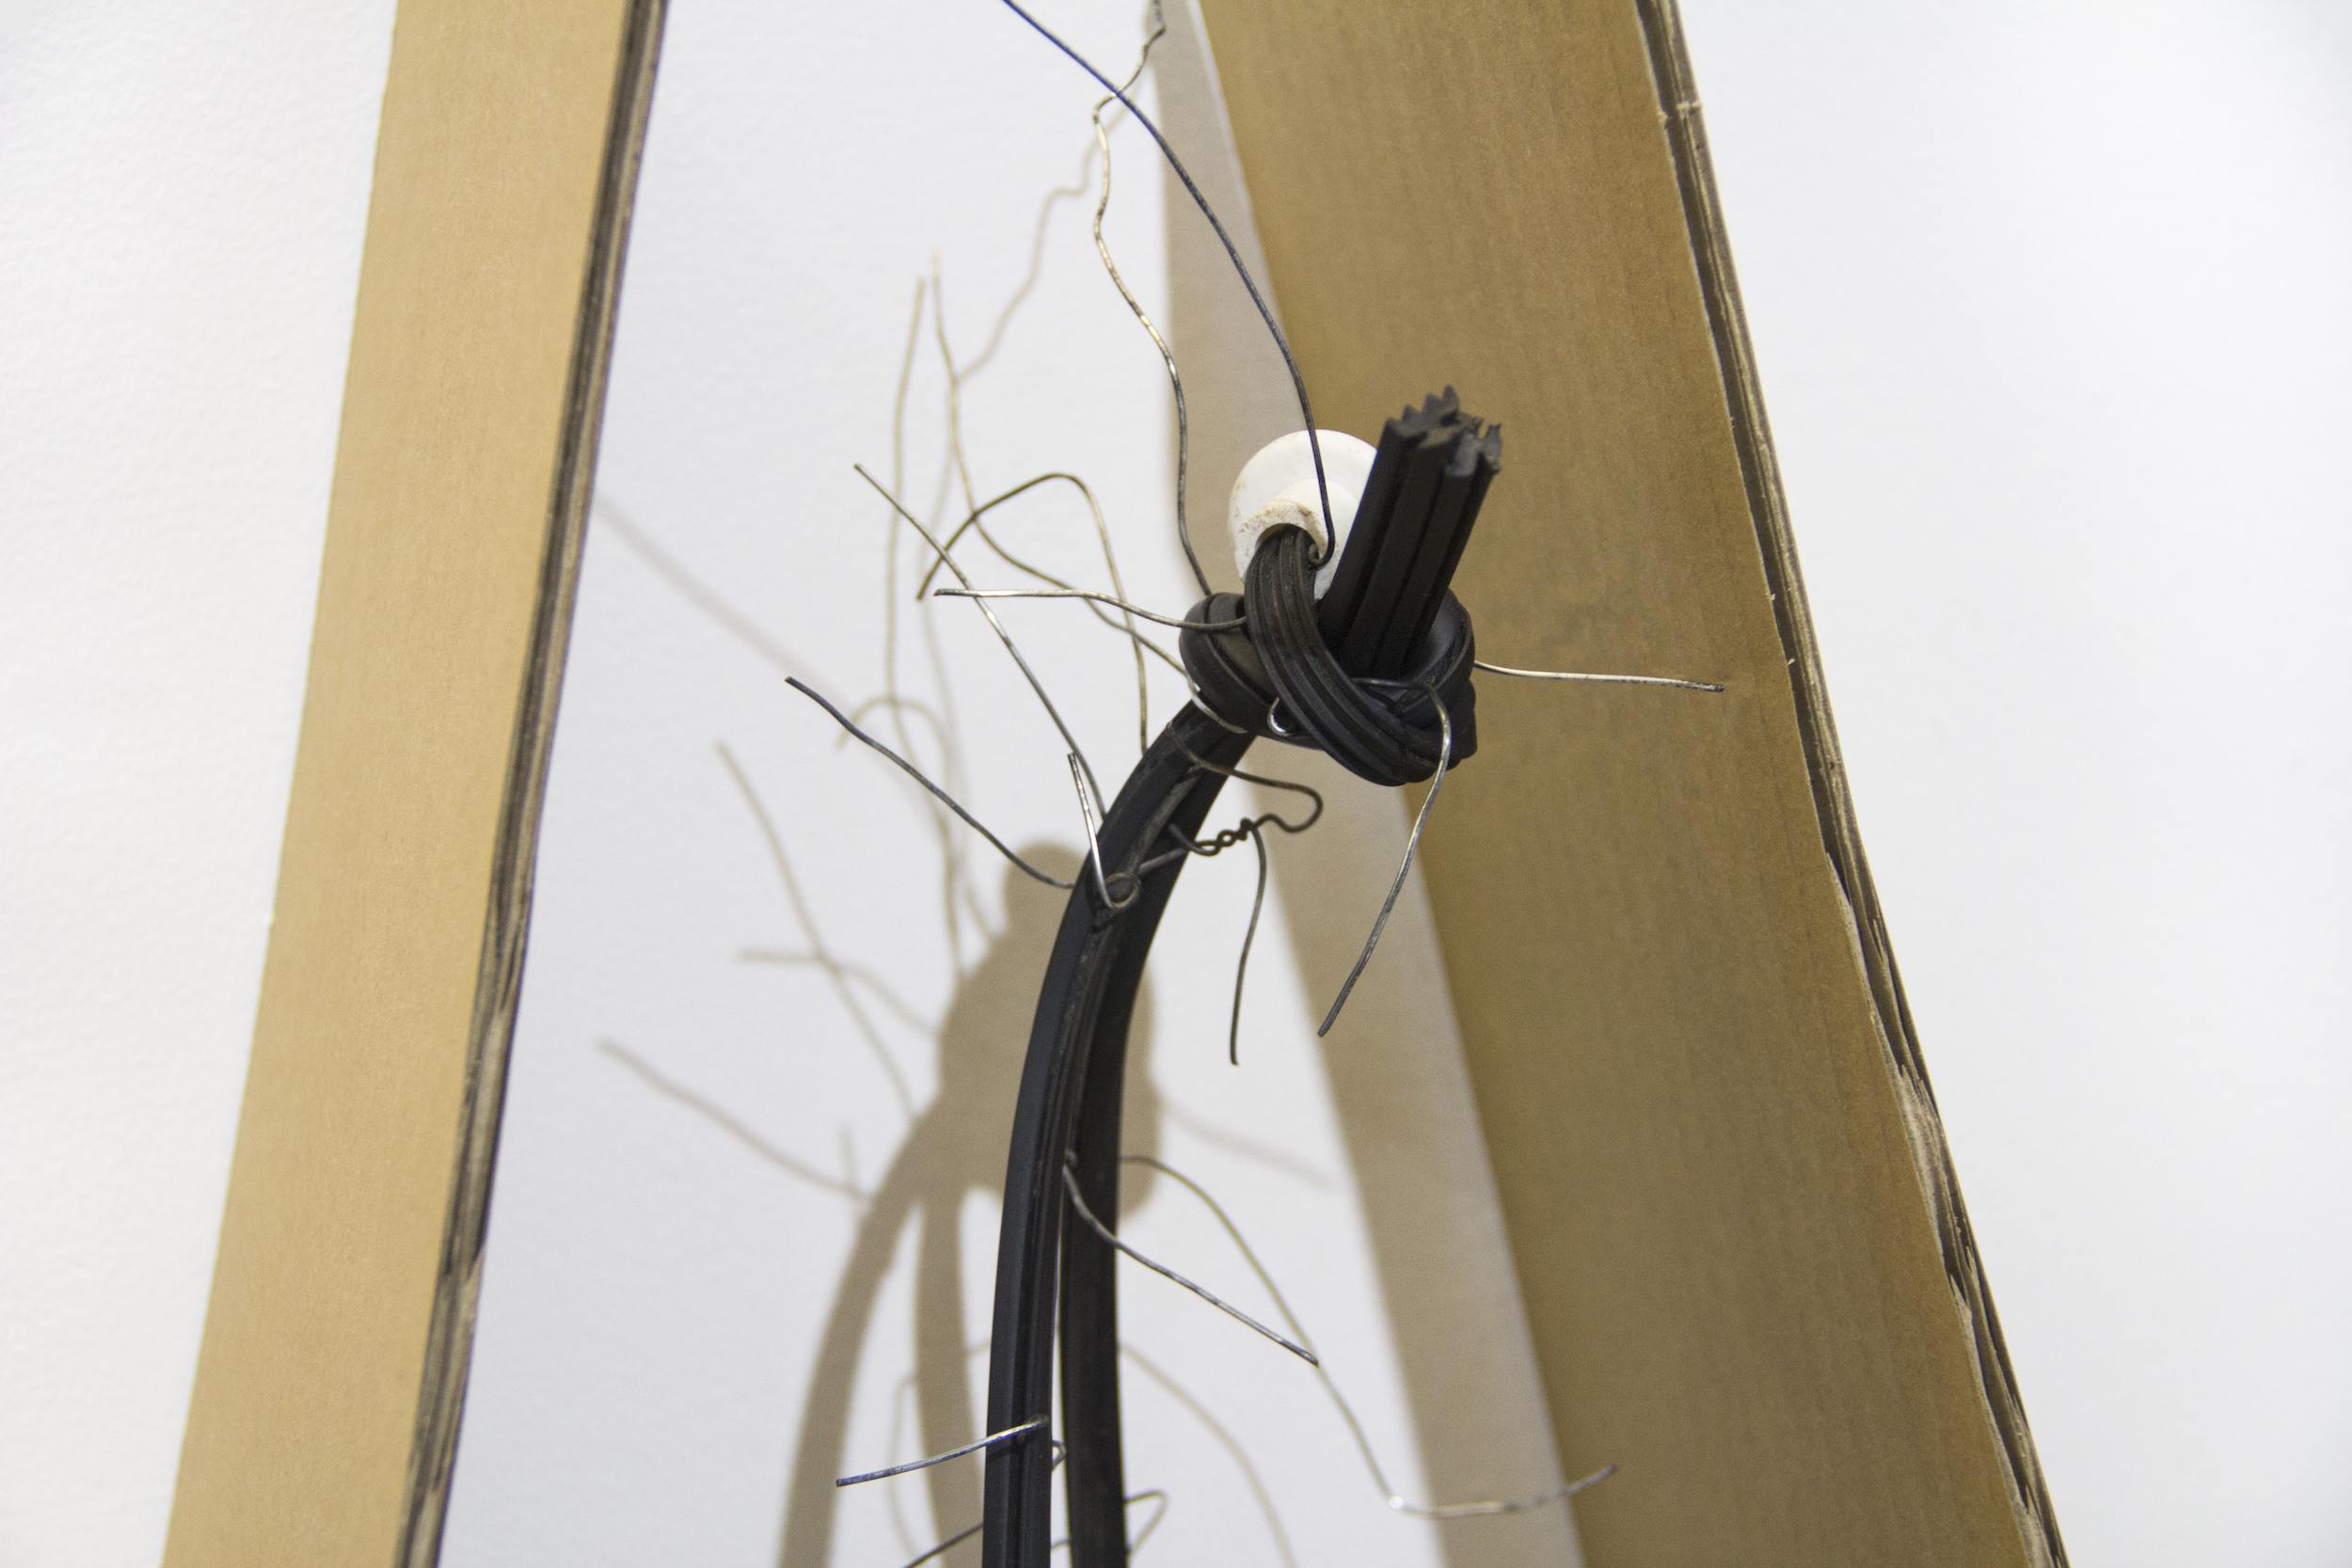    The cradle   (detail)  Used wire from funeral tent and cardboard packaging; found wooden structure, rubber tubing, plastic knob; and acrylic paint  Approx. 17 6/8 x 12 6/8 x 16 1/2 inches  2019 